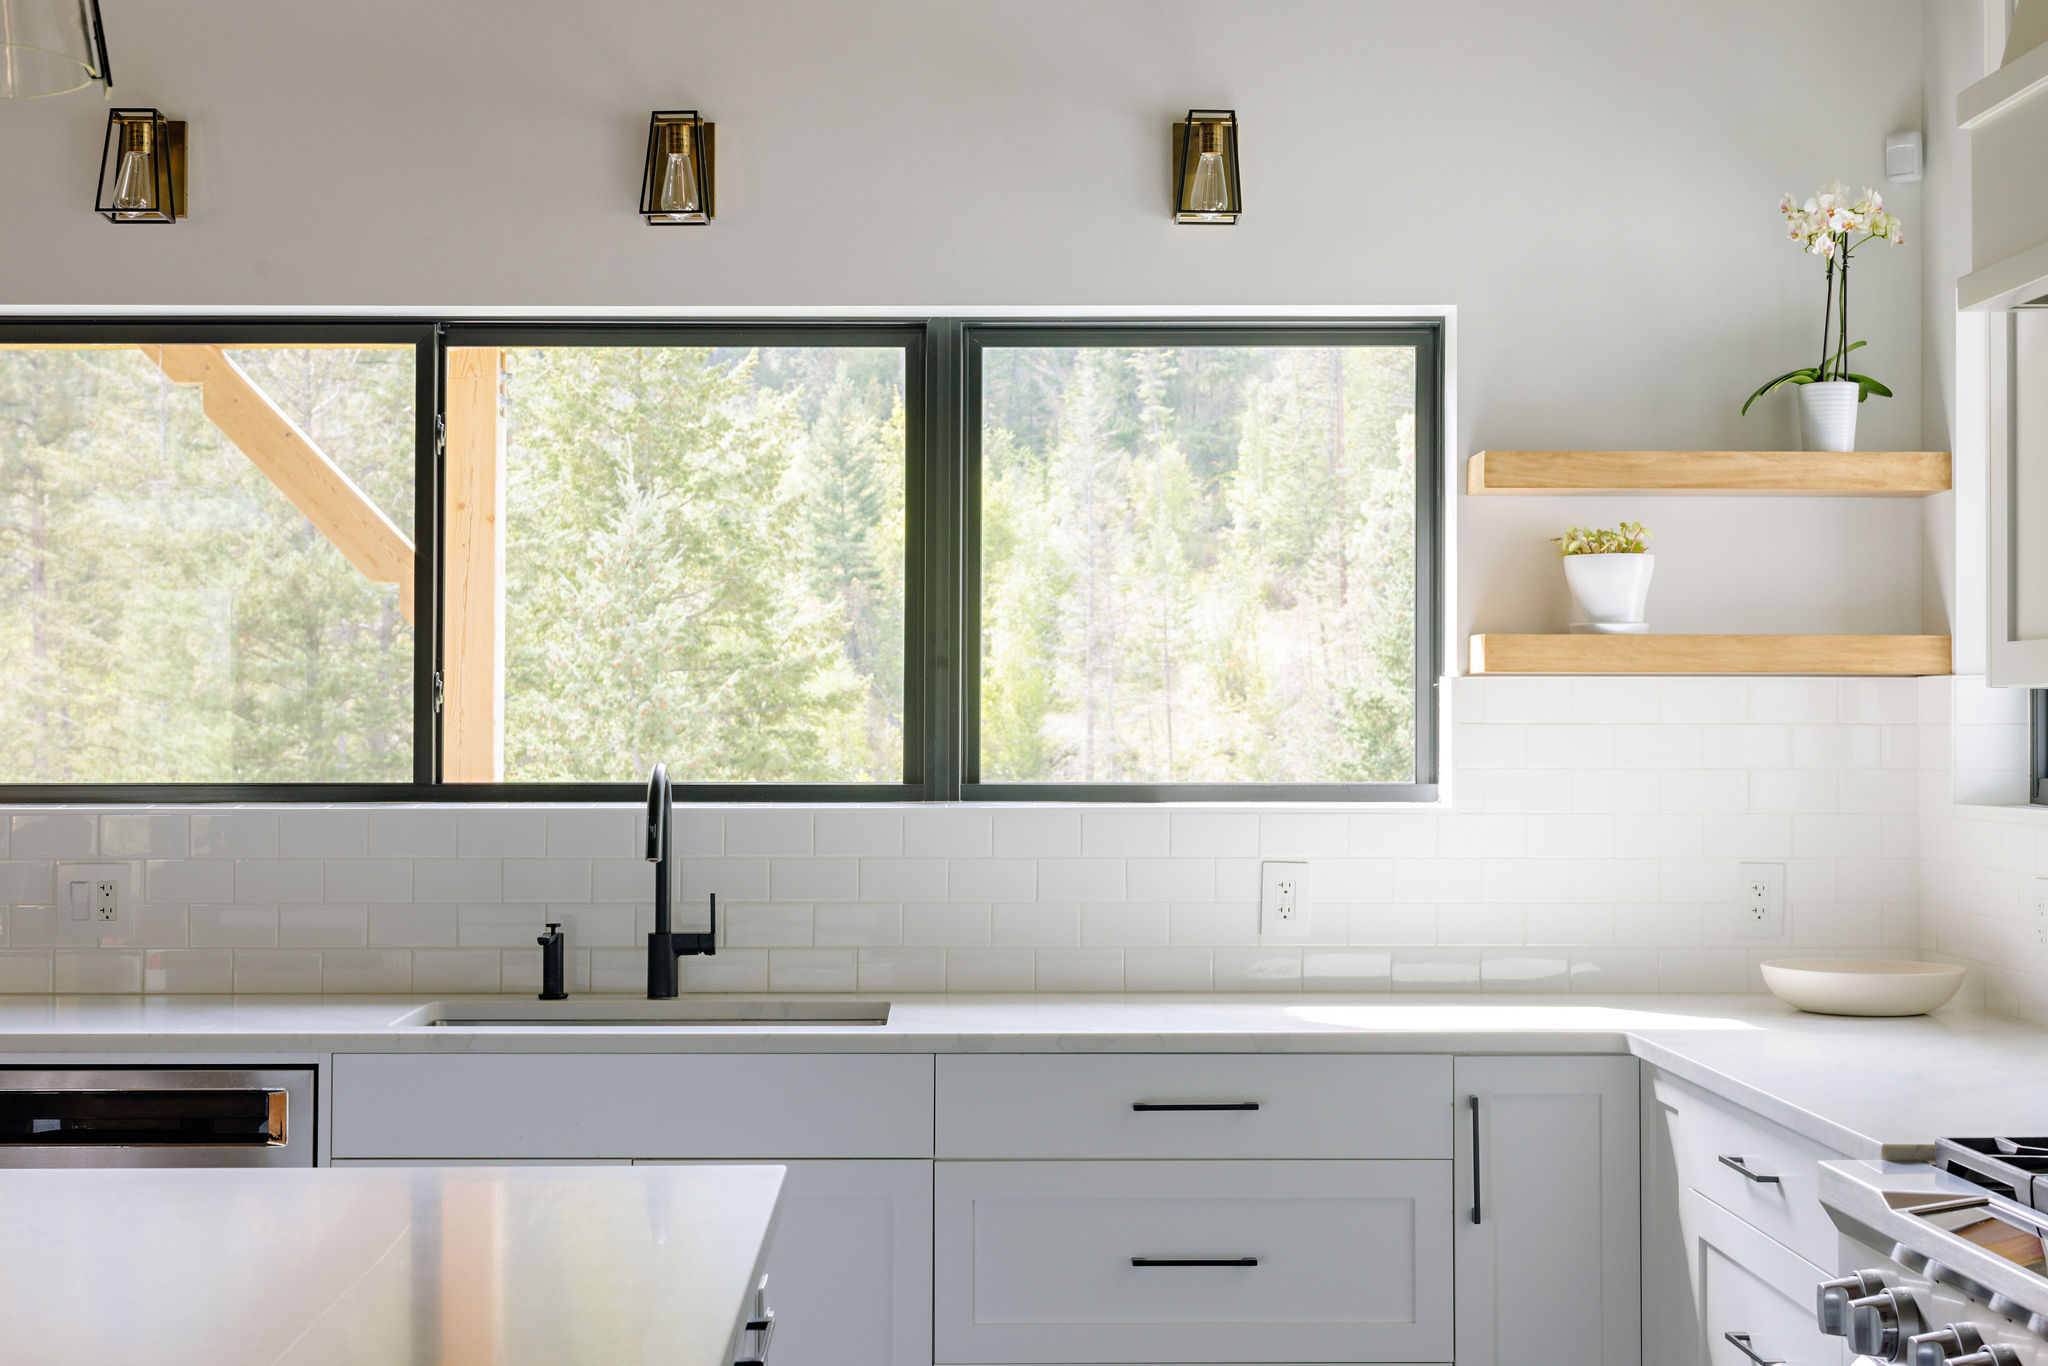 Image of the kitchen sink with white cabinetry and a row of large windows above. There are natural wood open shelves with decorative plants.